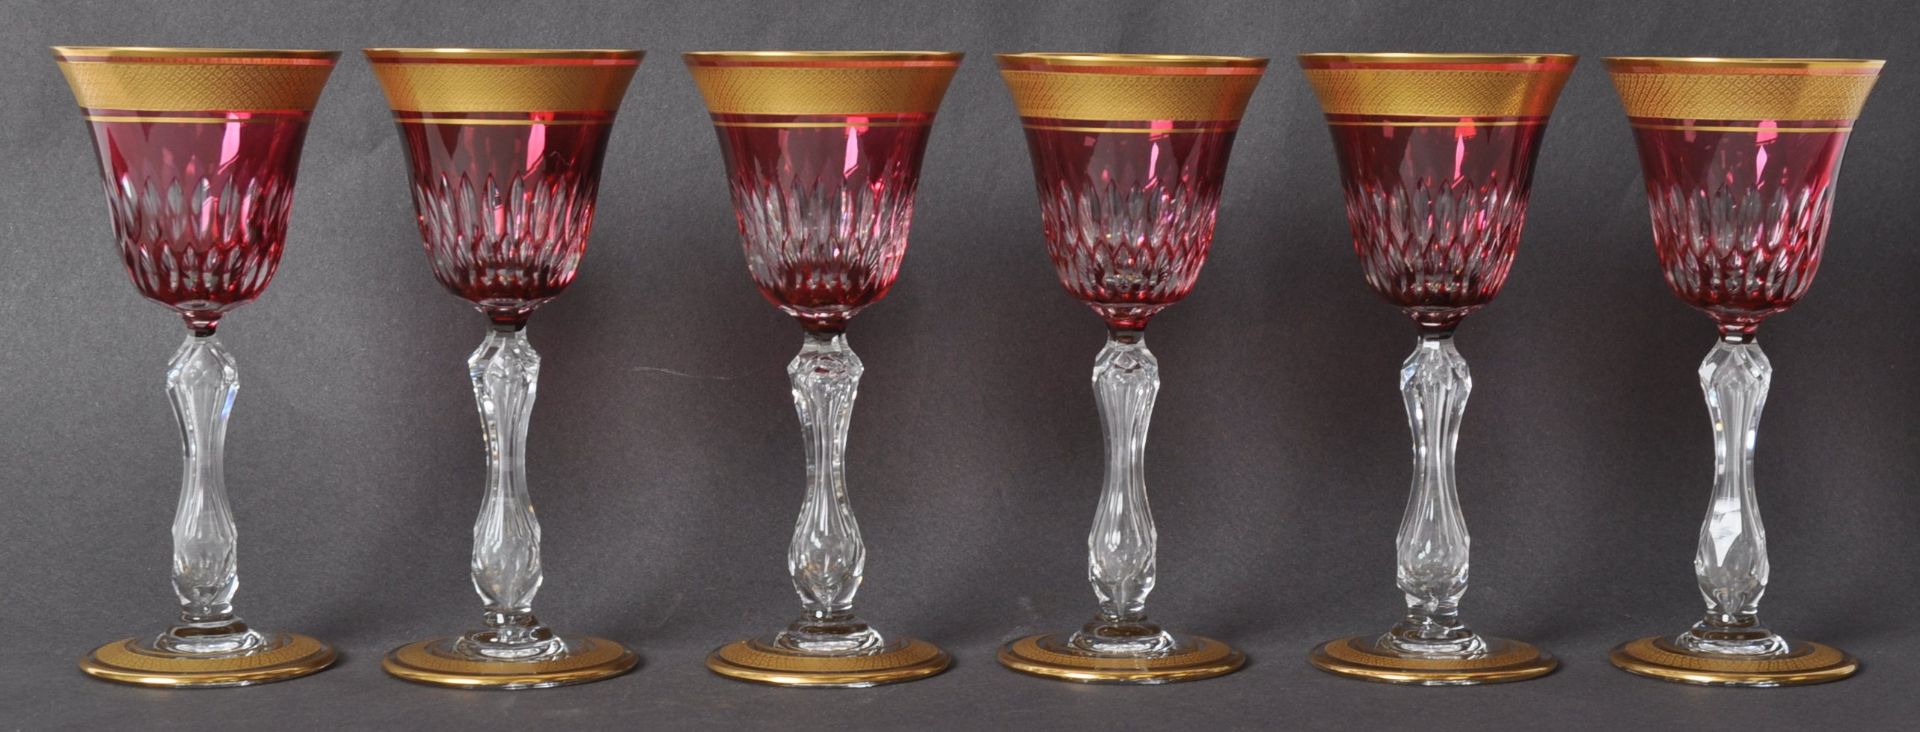 SET OF SIX SAINT LOUIS CRYSTAL WINE GOBLETS IN RUBY & GILT